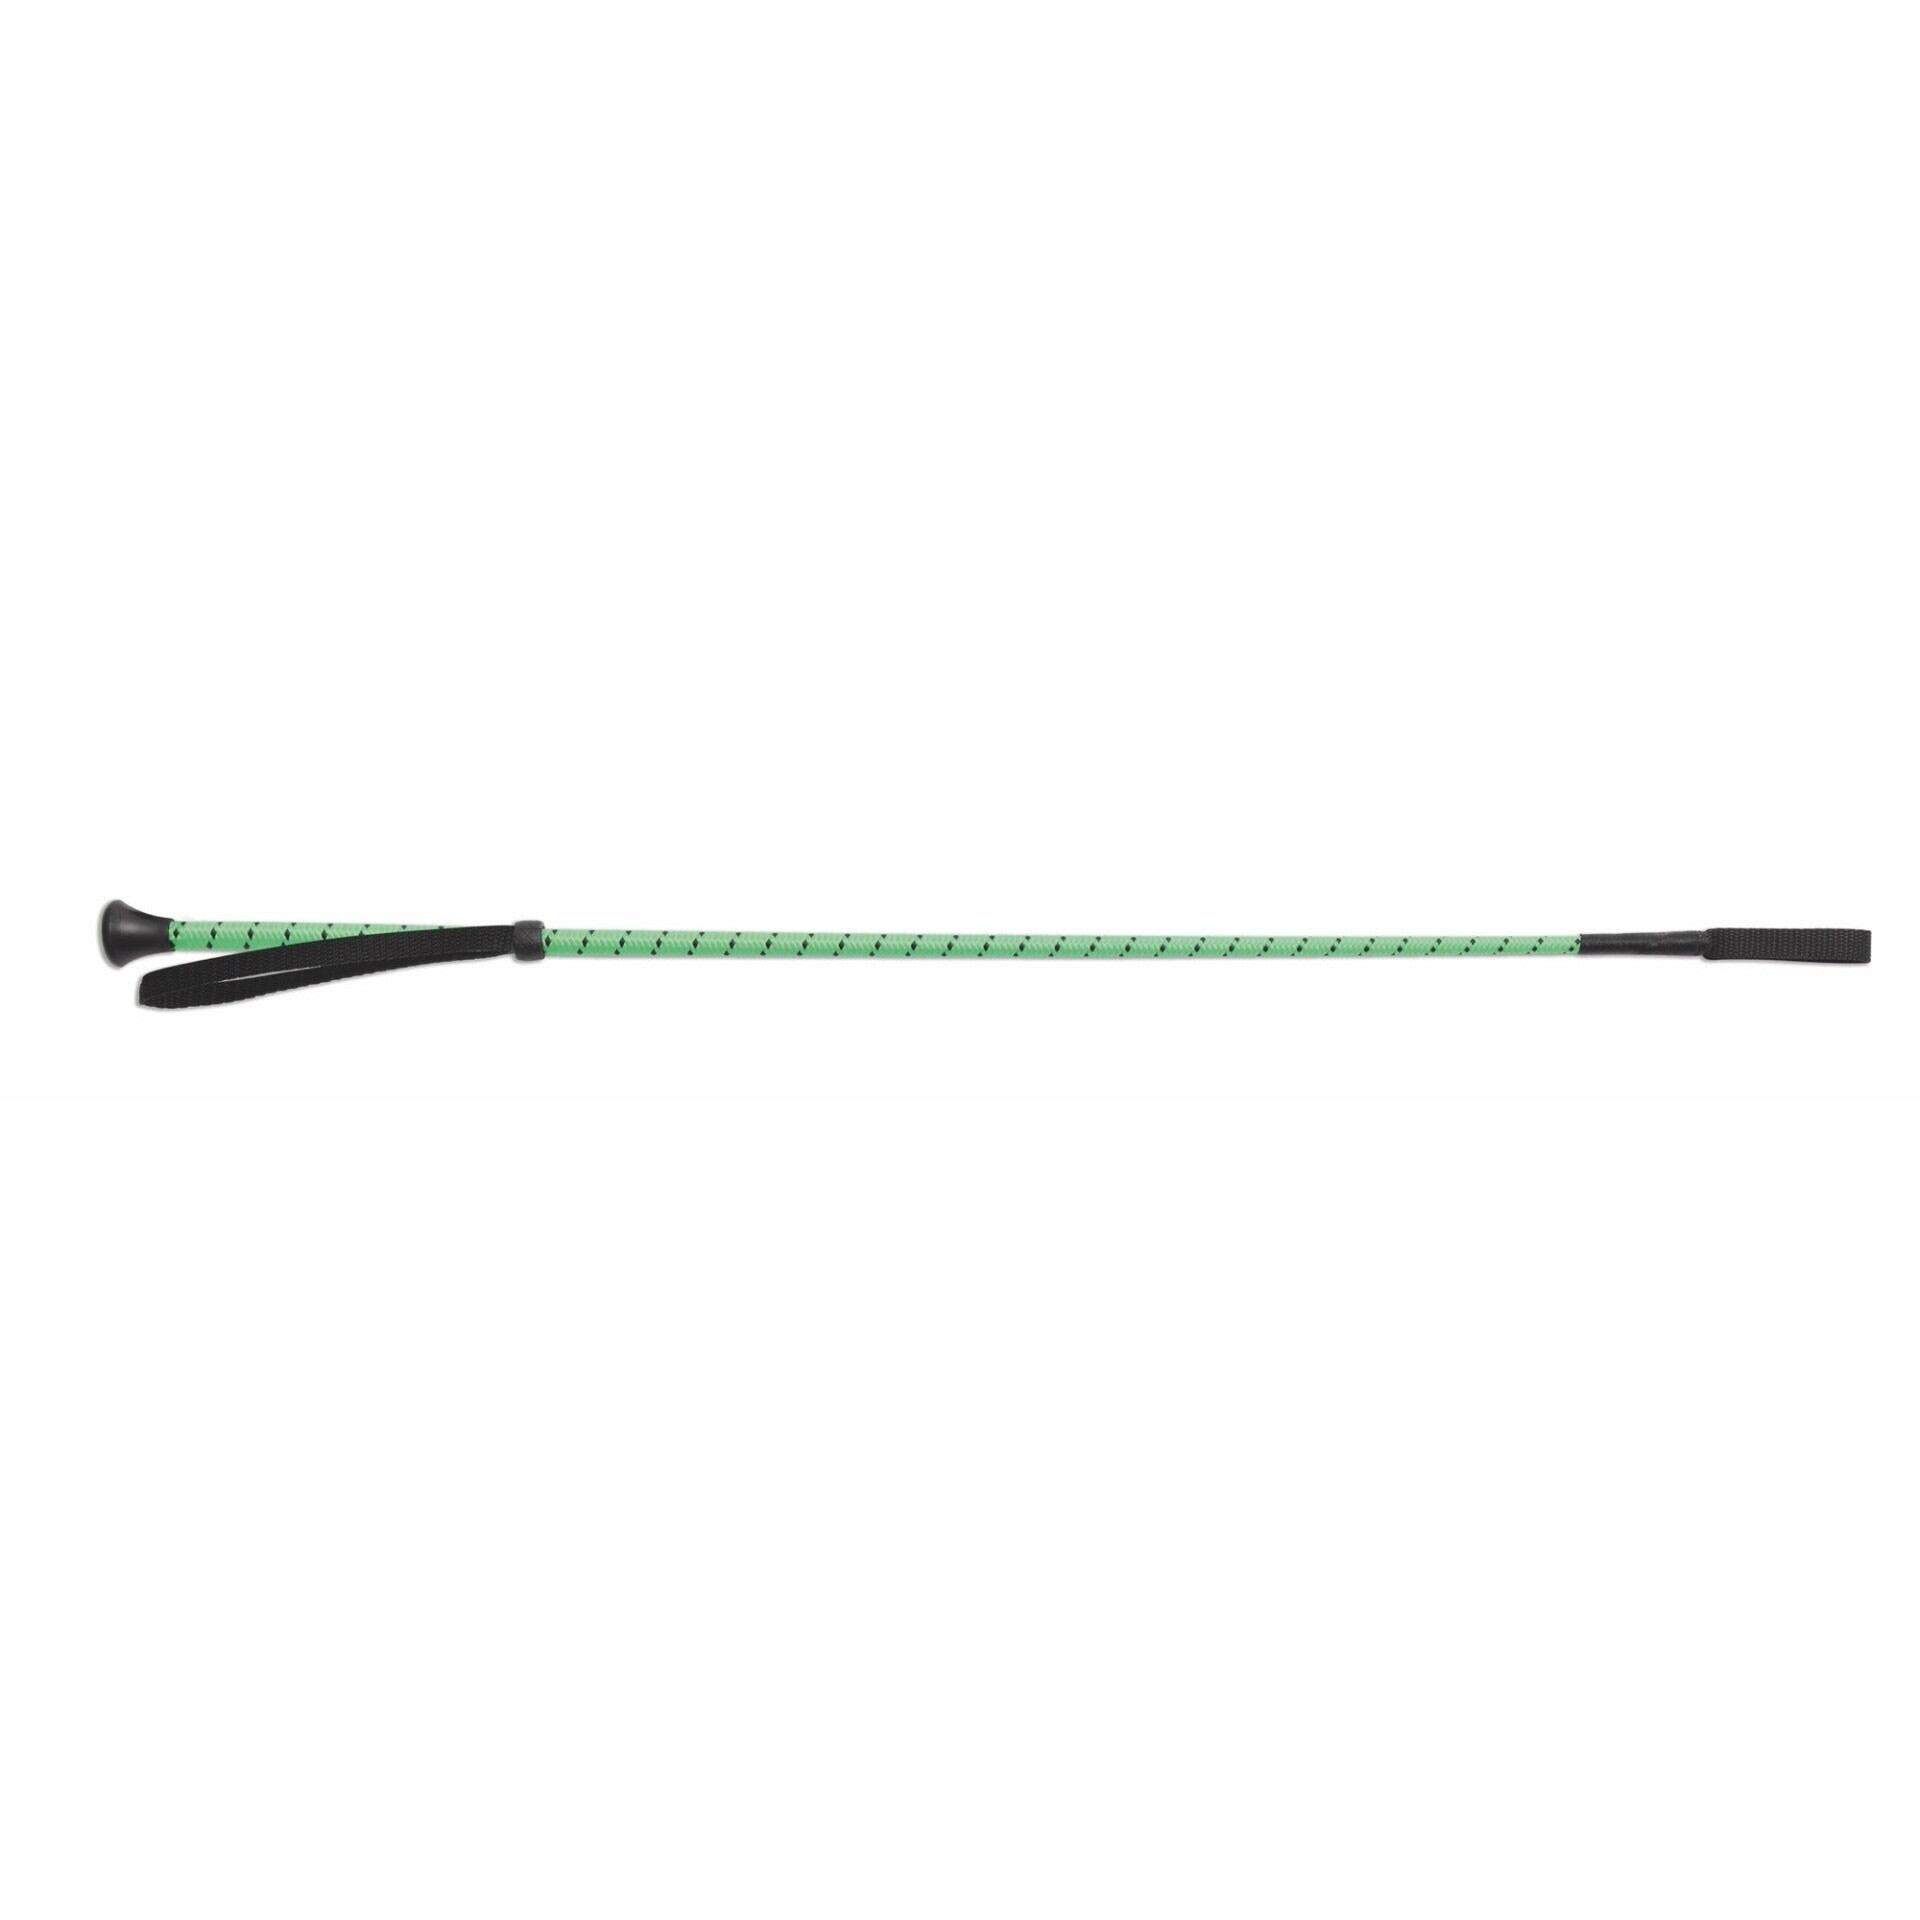 SHIRES Thread Stem Horse Riding Whip (Green)